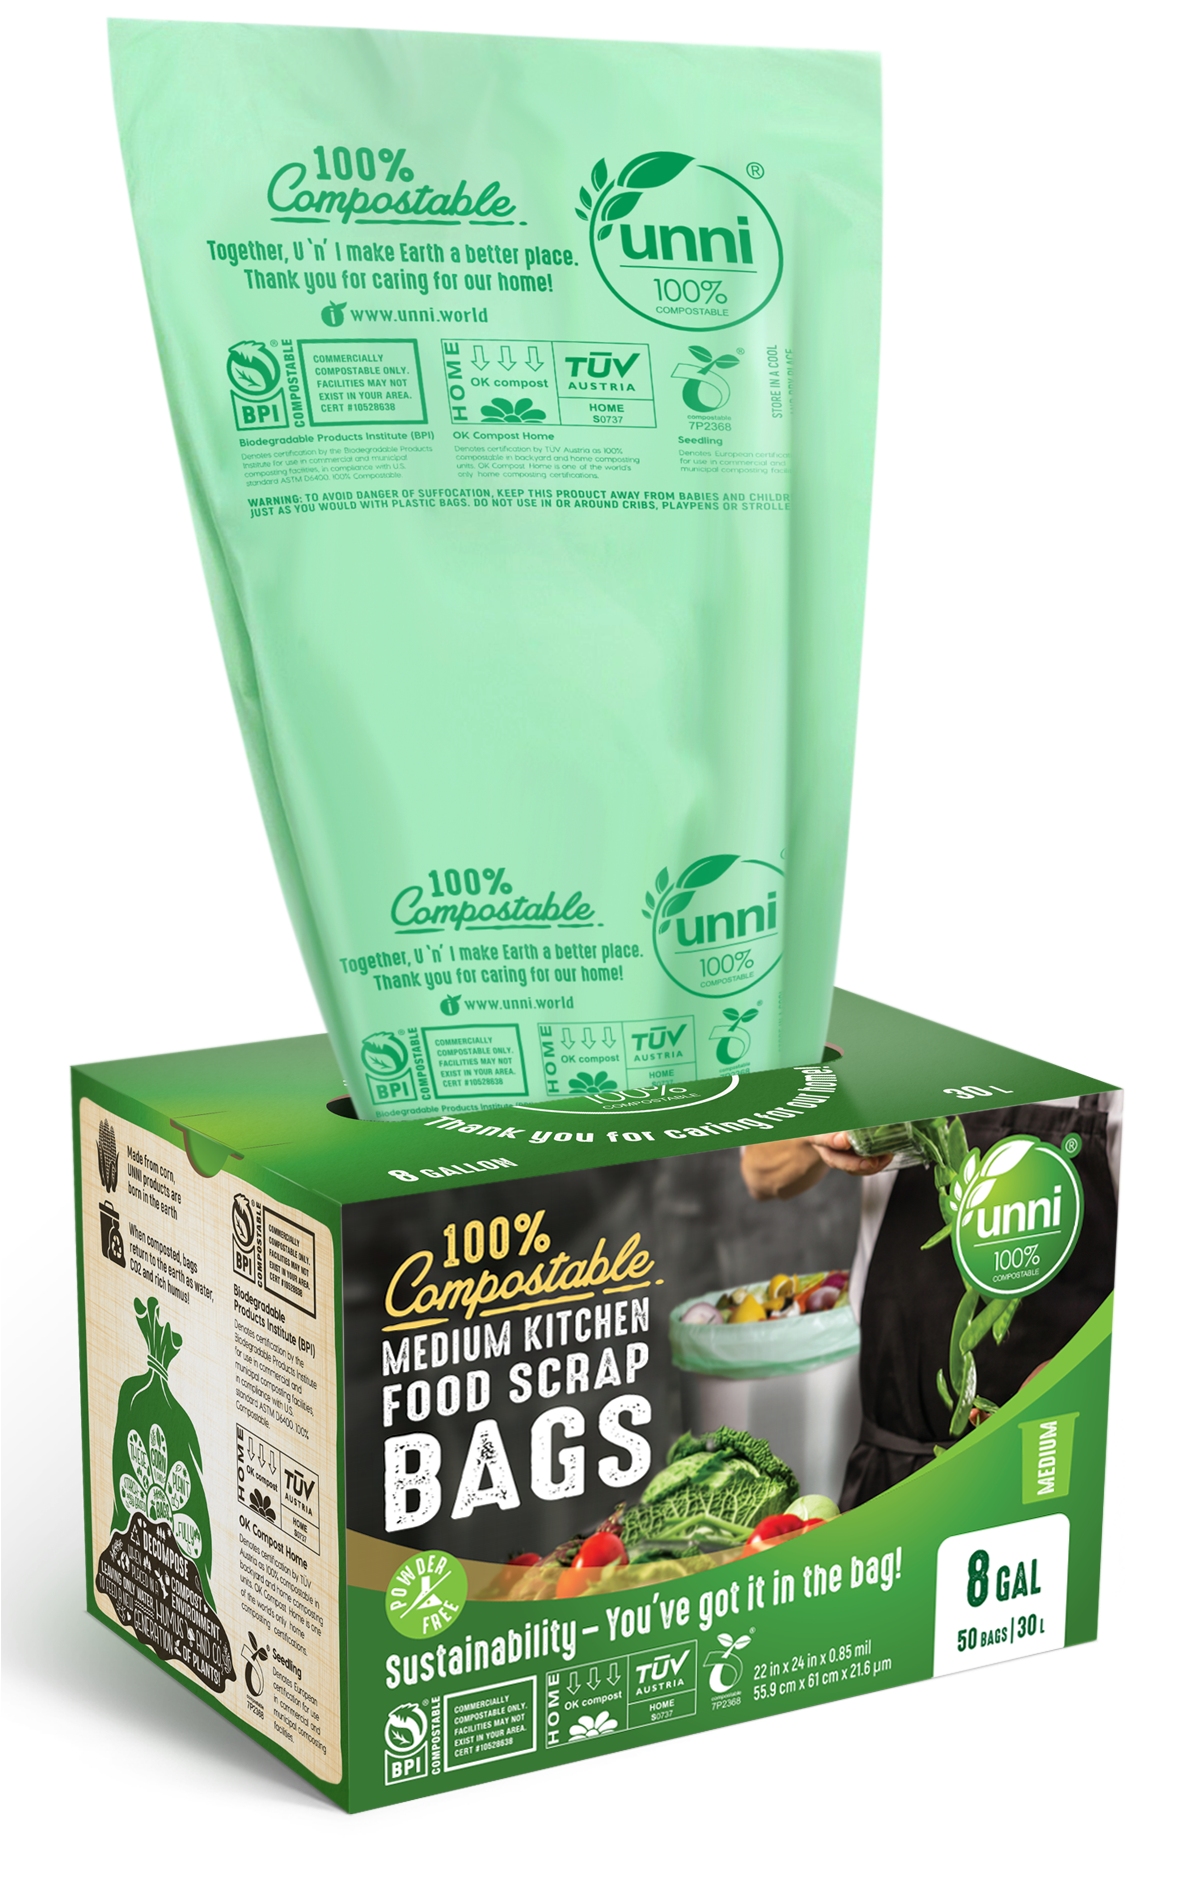 The 7 Best Biodegradable trash bags brands for your Sustainable Kitchen